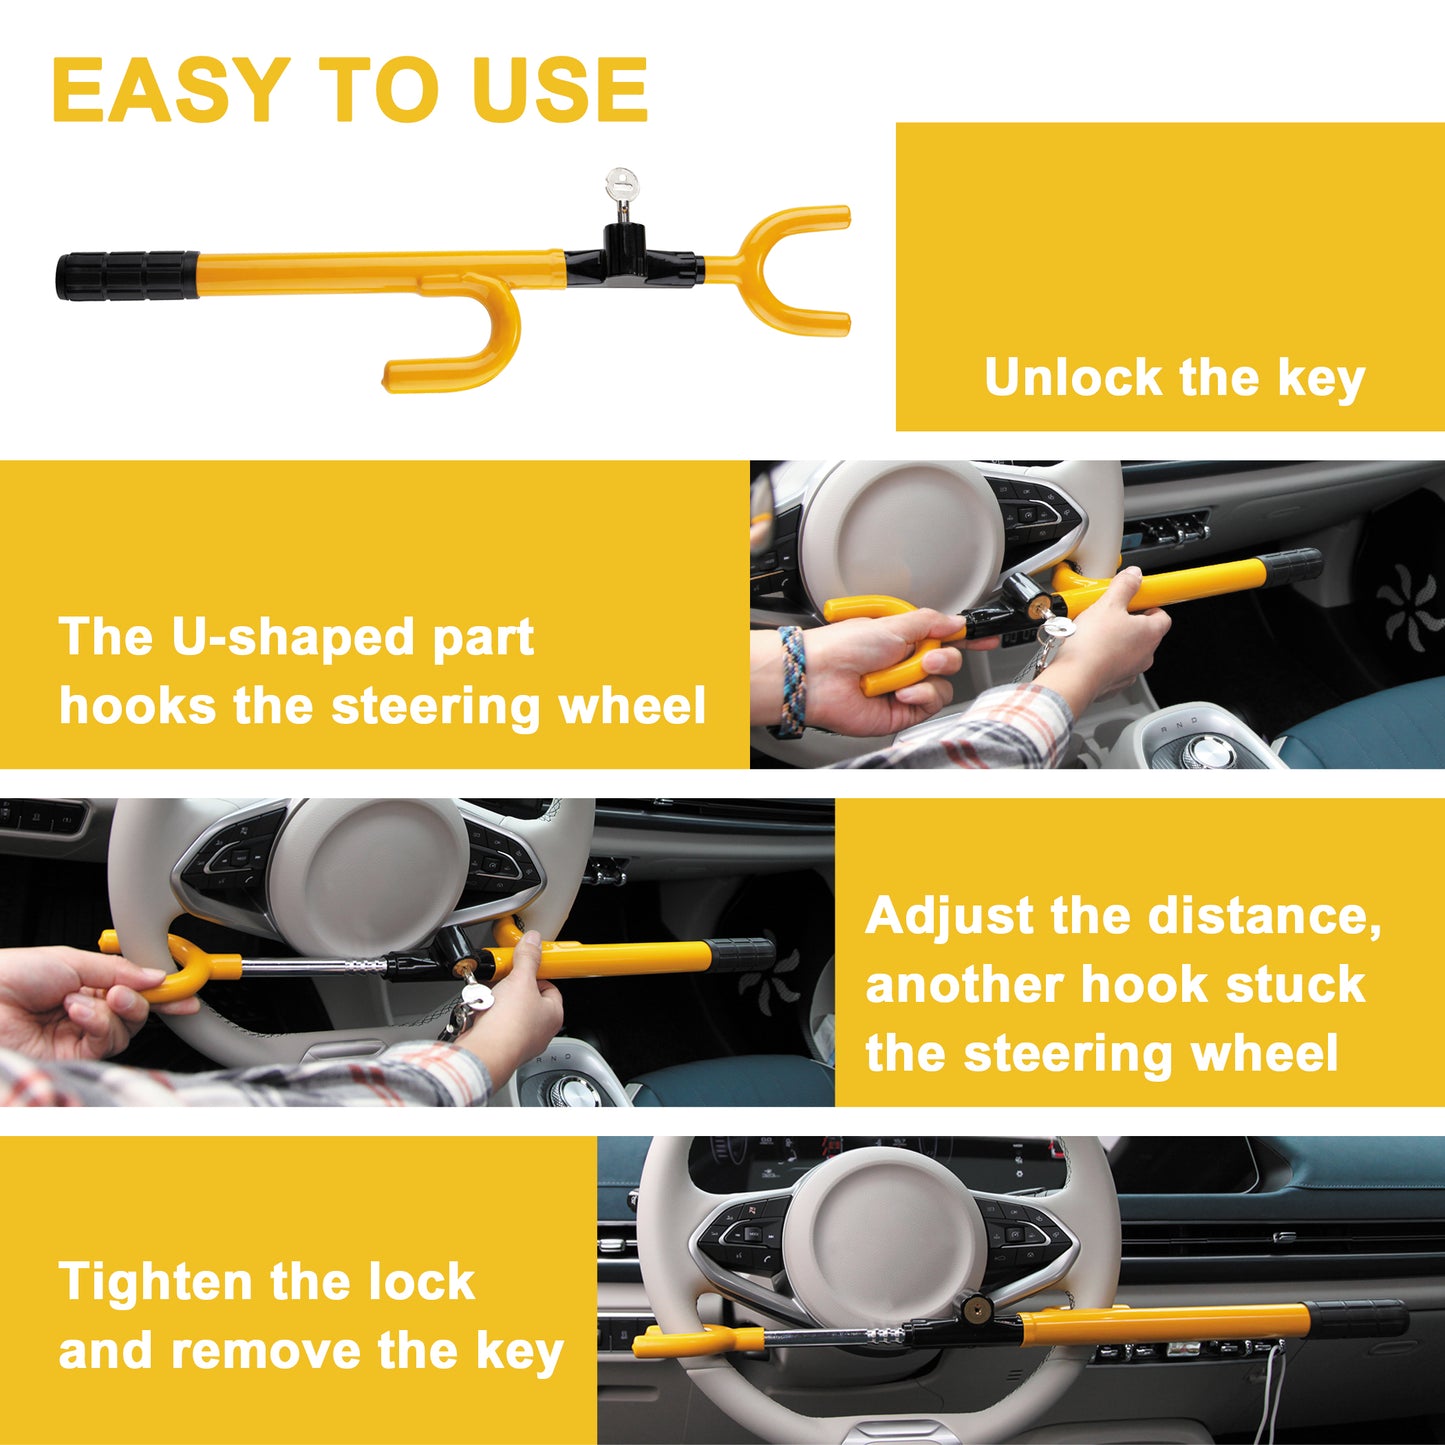 CARTMAN Vehicle Steering Wheel Lock Car Anti Theft Security Lock with Adjustable Length Fit for Cars Trucks Vans and SUVs